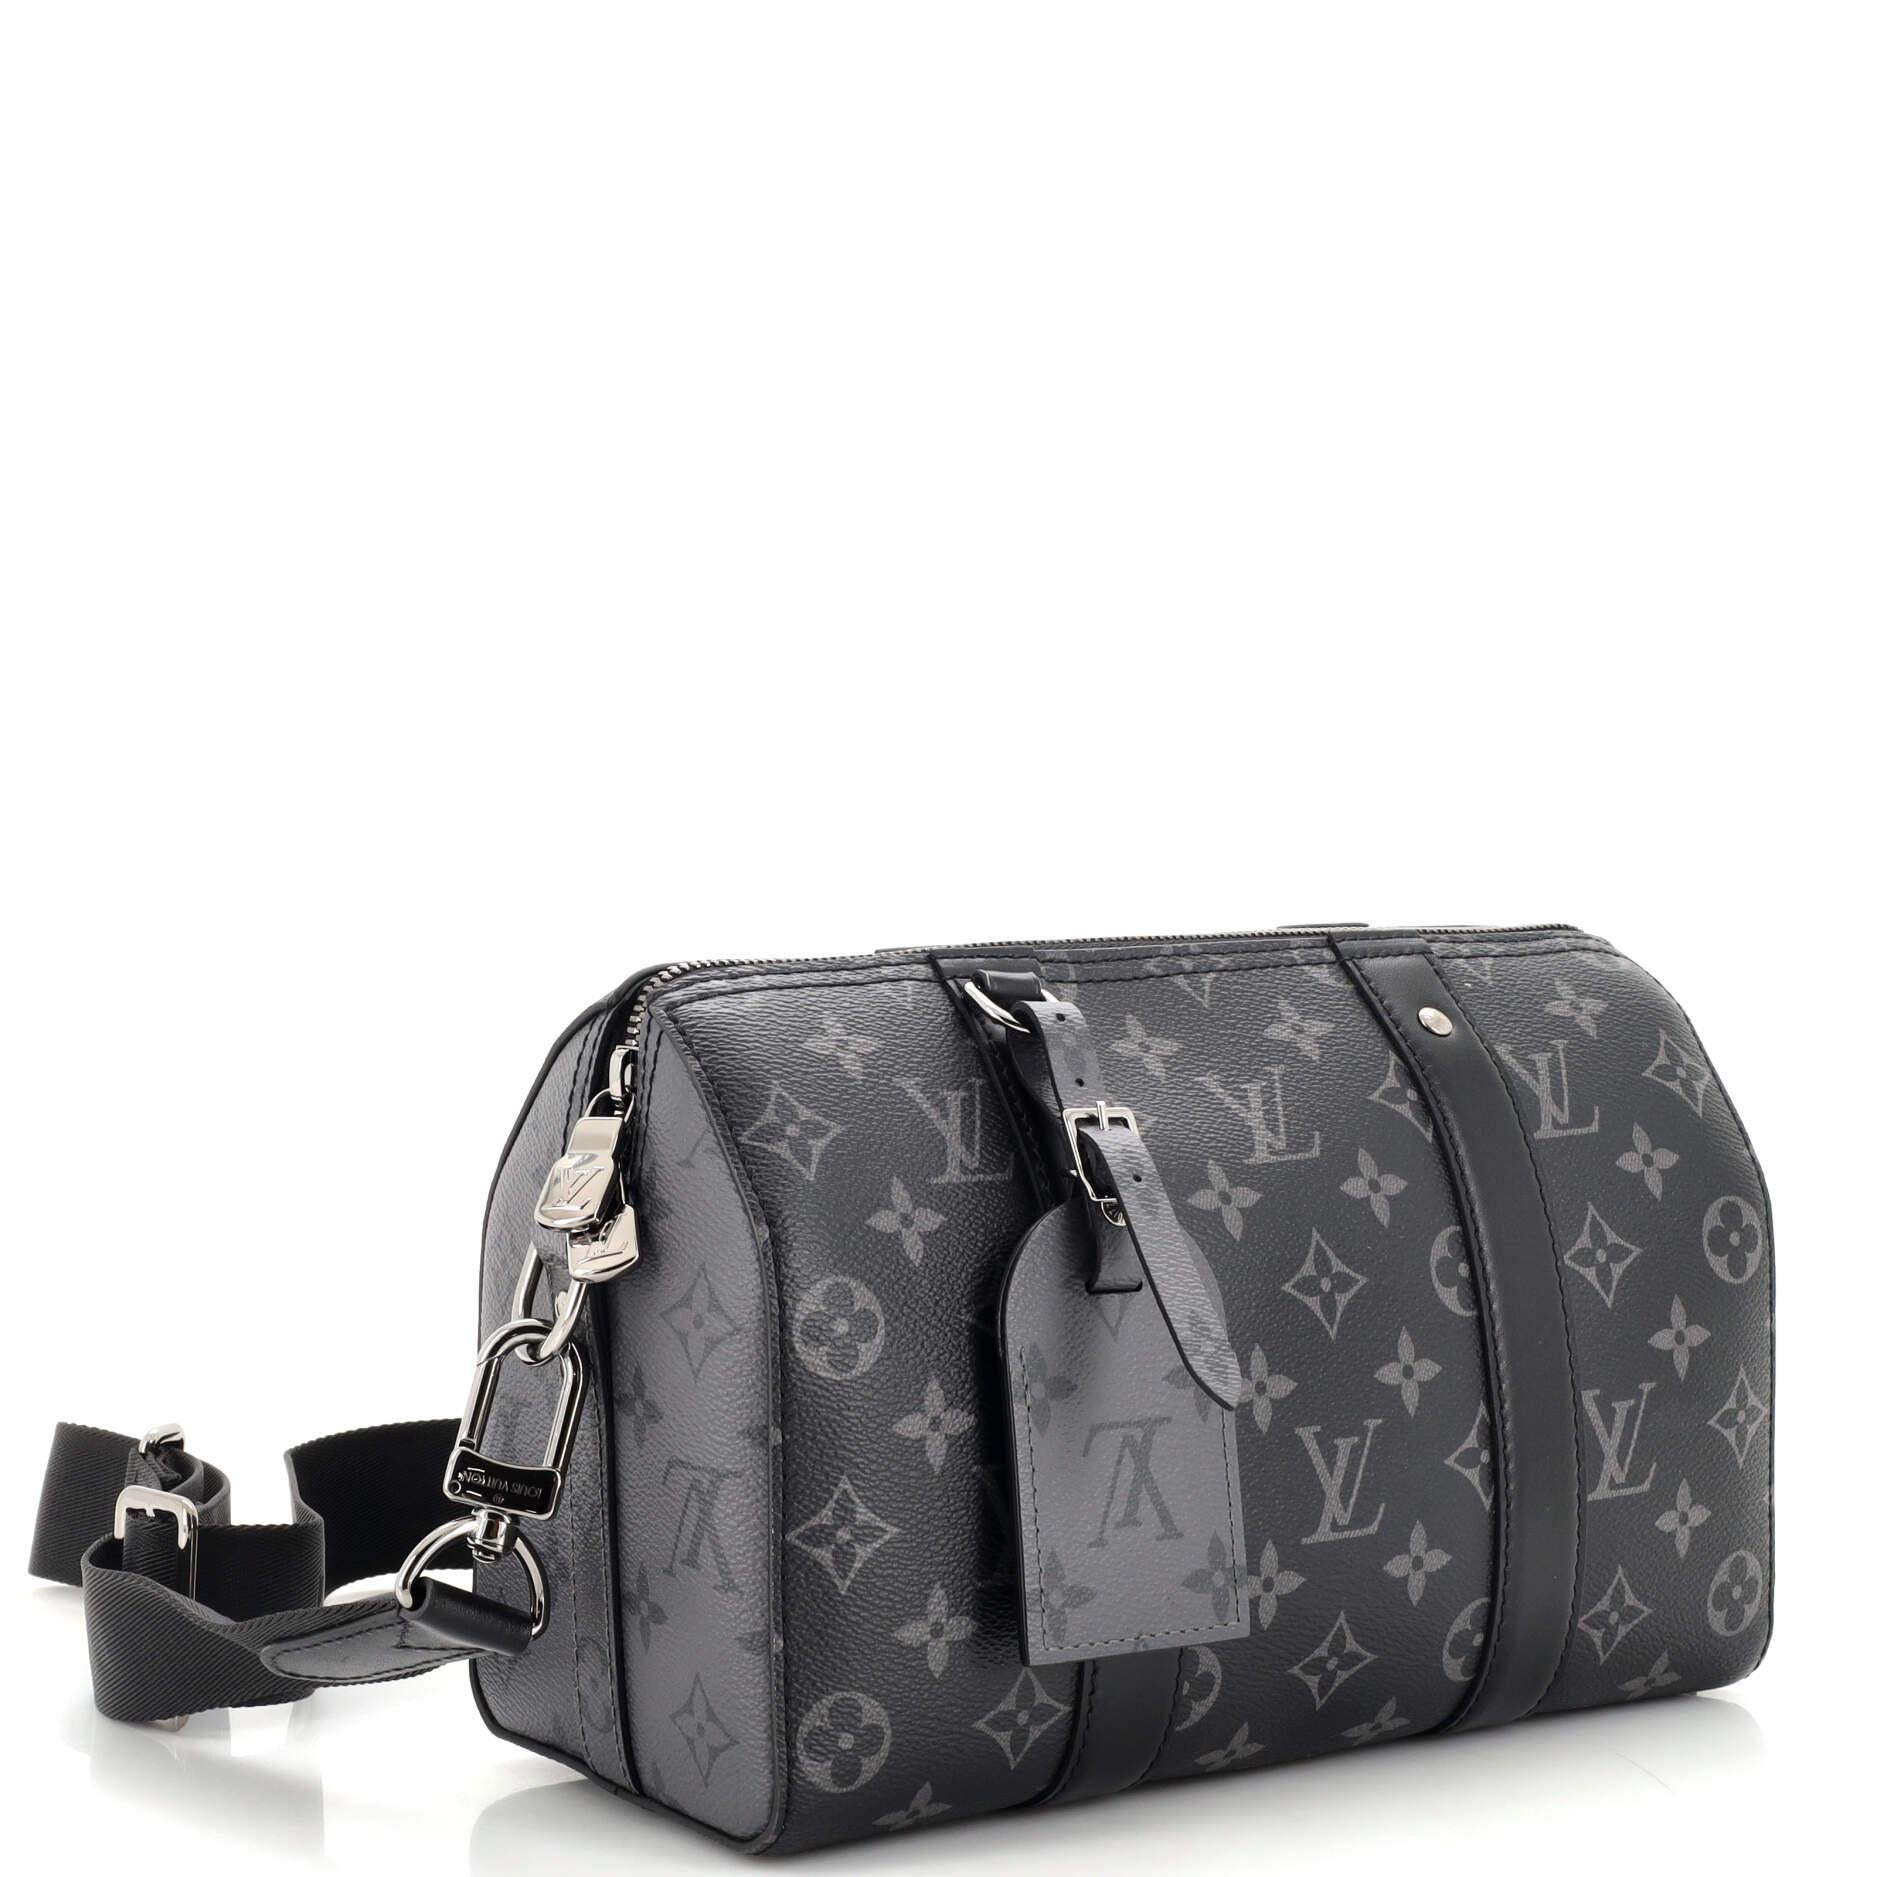 NEW Louis Vuitton City Keepall Bag in debossed Monogram Seal leather -  pre-Fall 2021 with microchip 